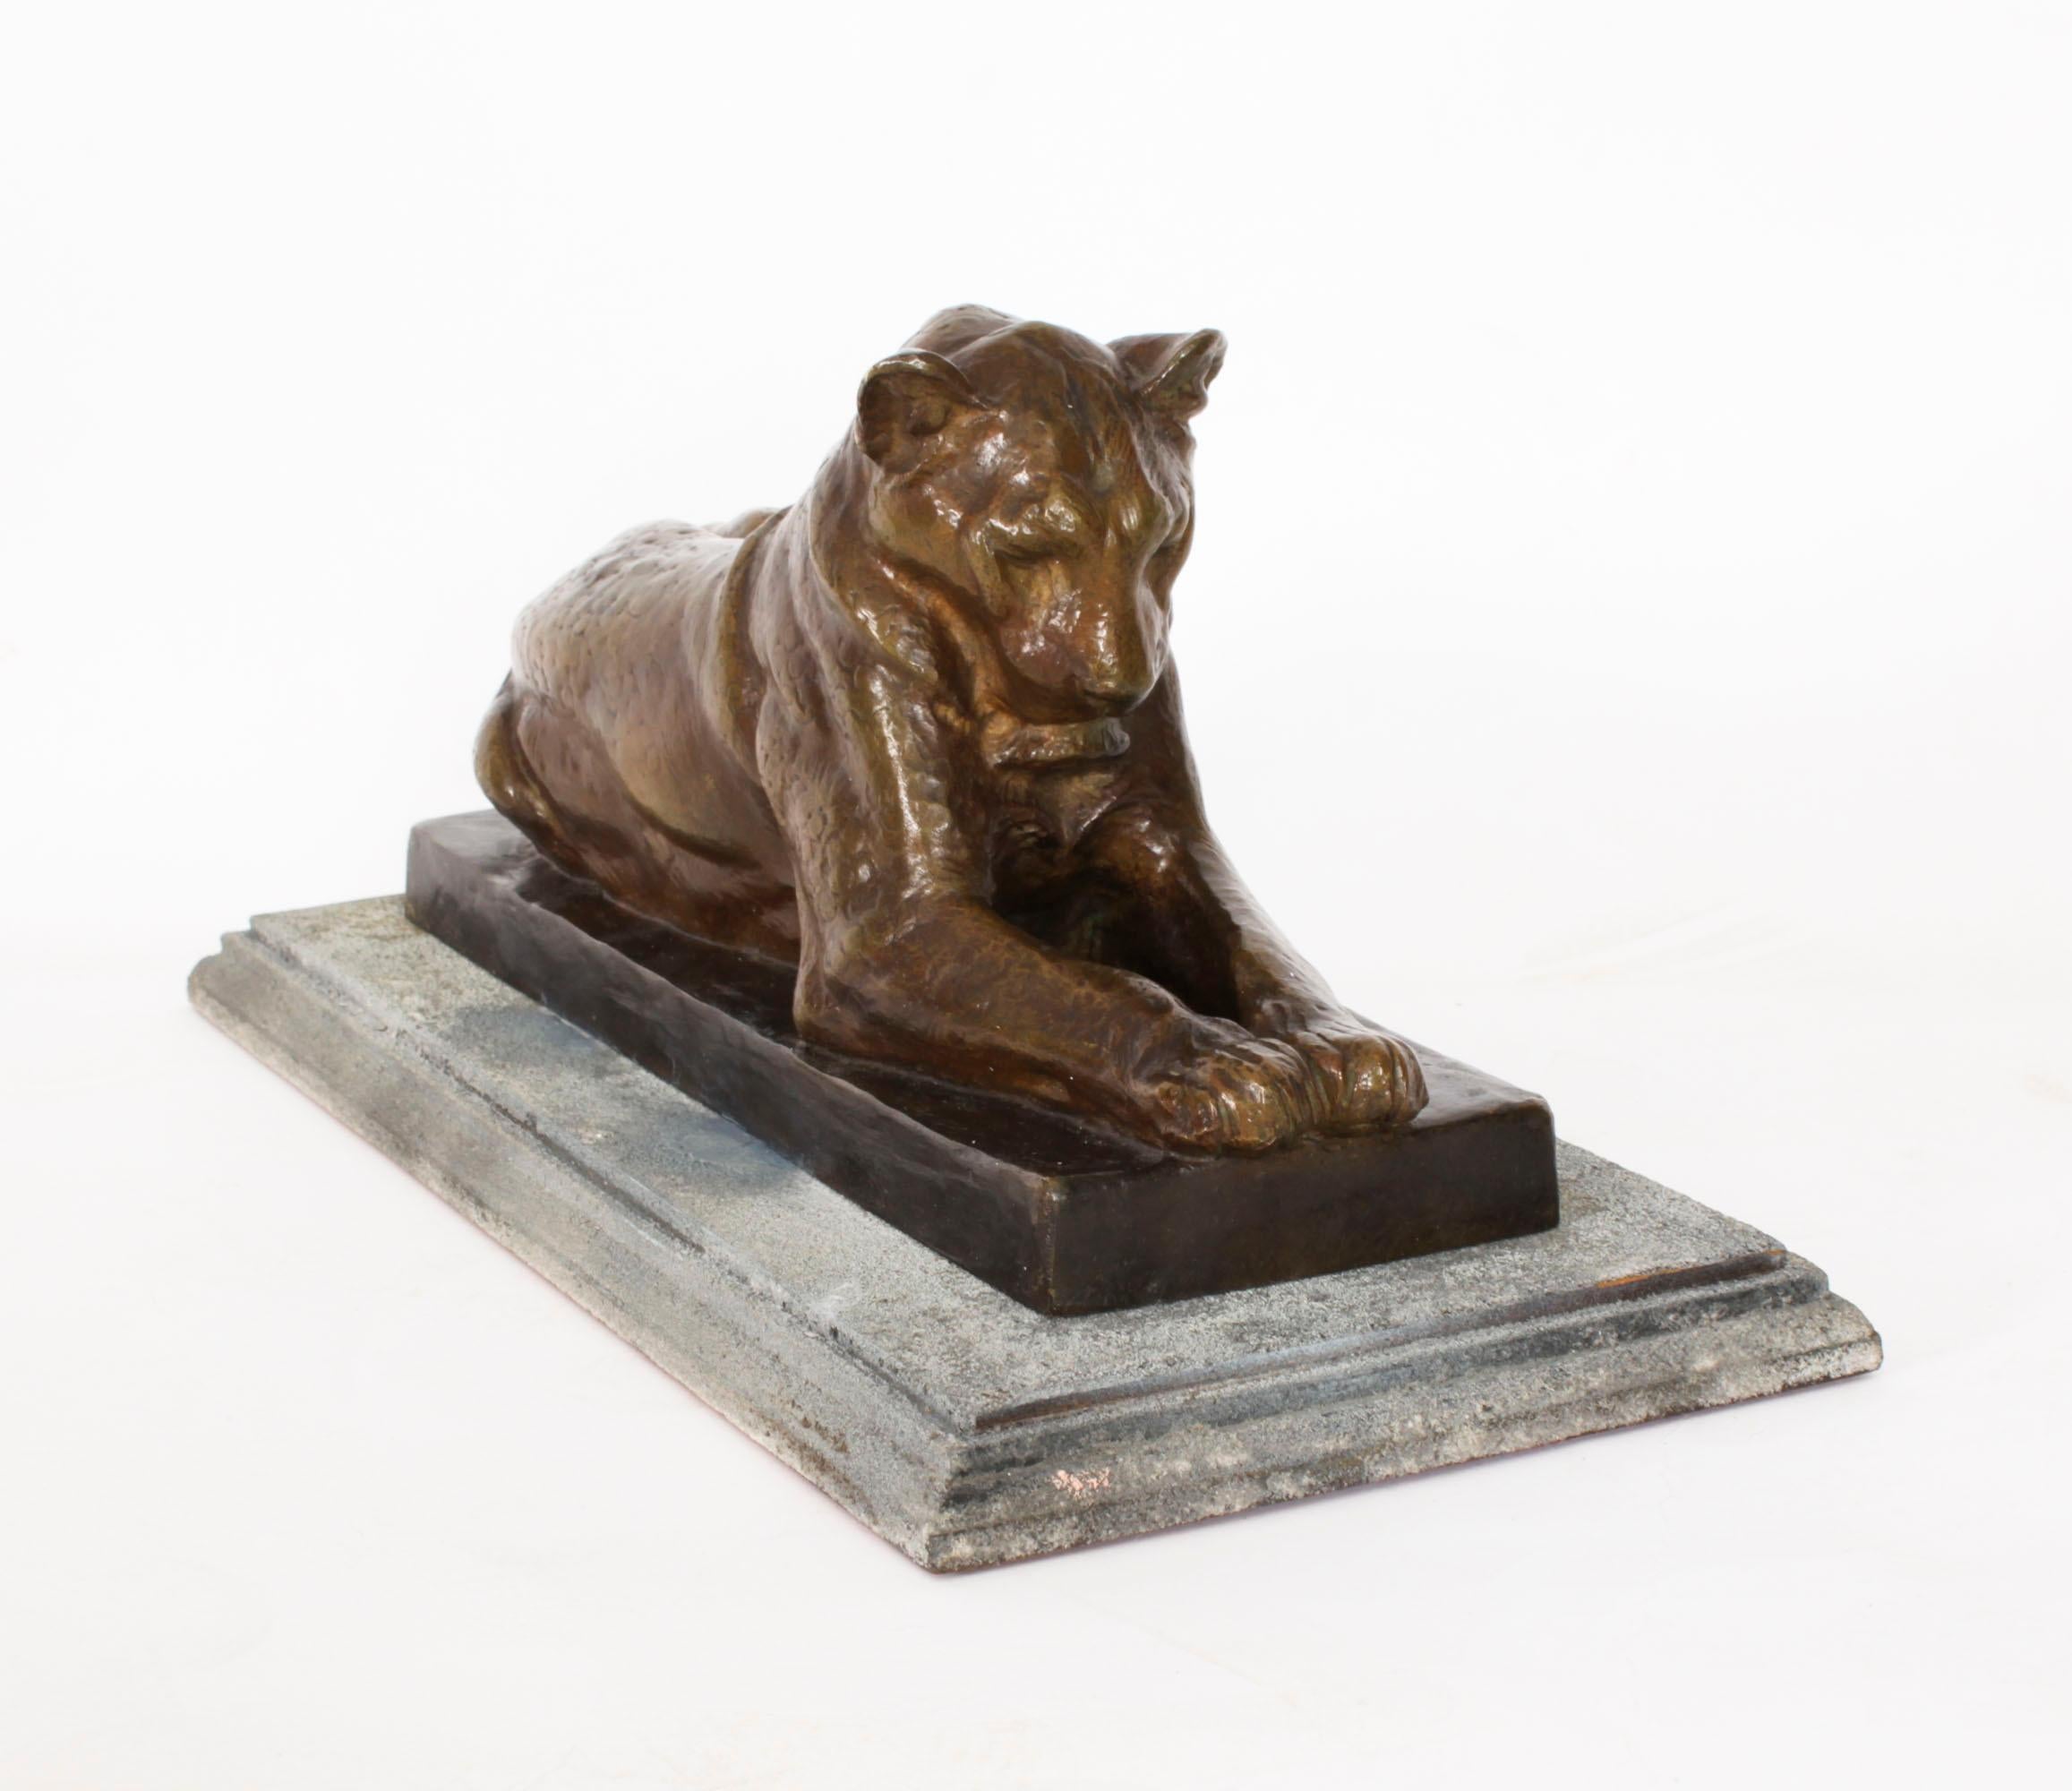 This is a beautiful antique bronze sculpture of a lioness by the renowned French sculptor Louis Riche (1877 - 1947), circa 1910 in date.
 
The sculpture depicts a recumbent lioness raised on a stepped rectangular base, signed L Riche and inscribed